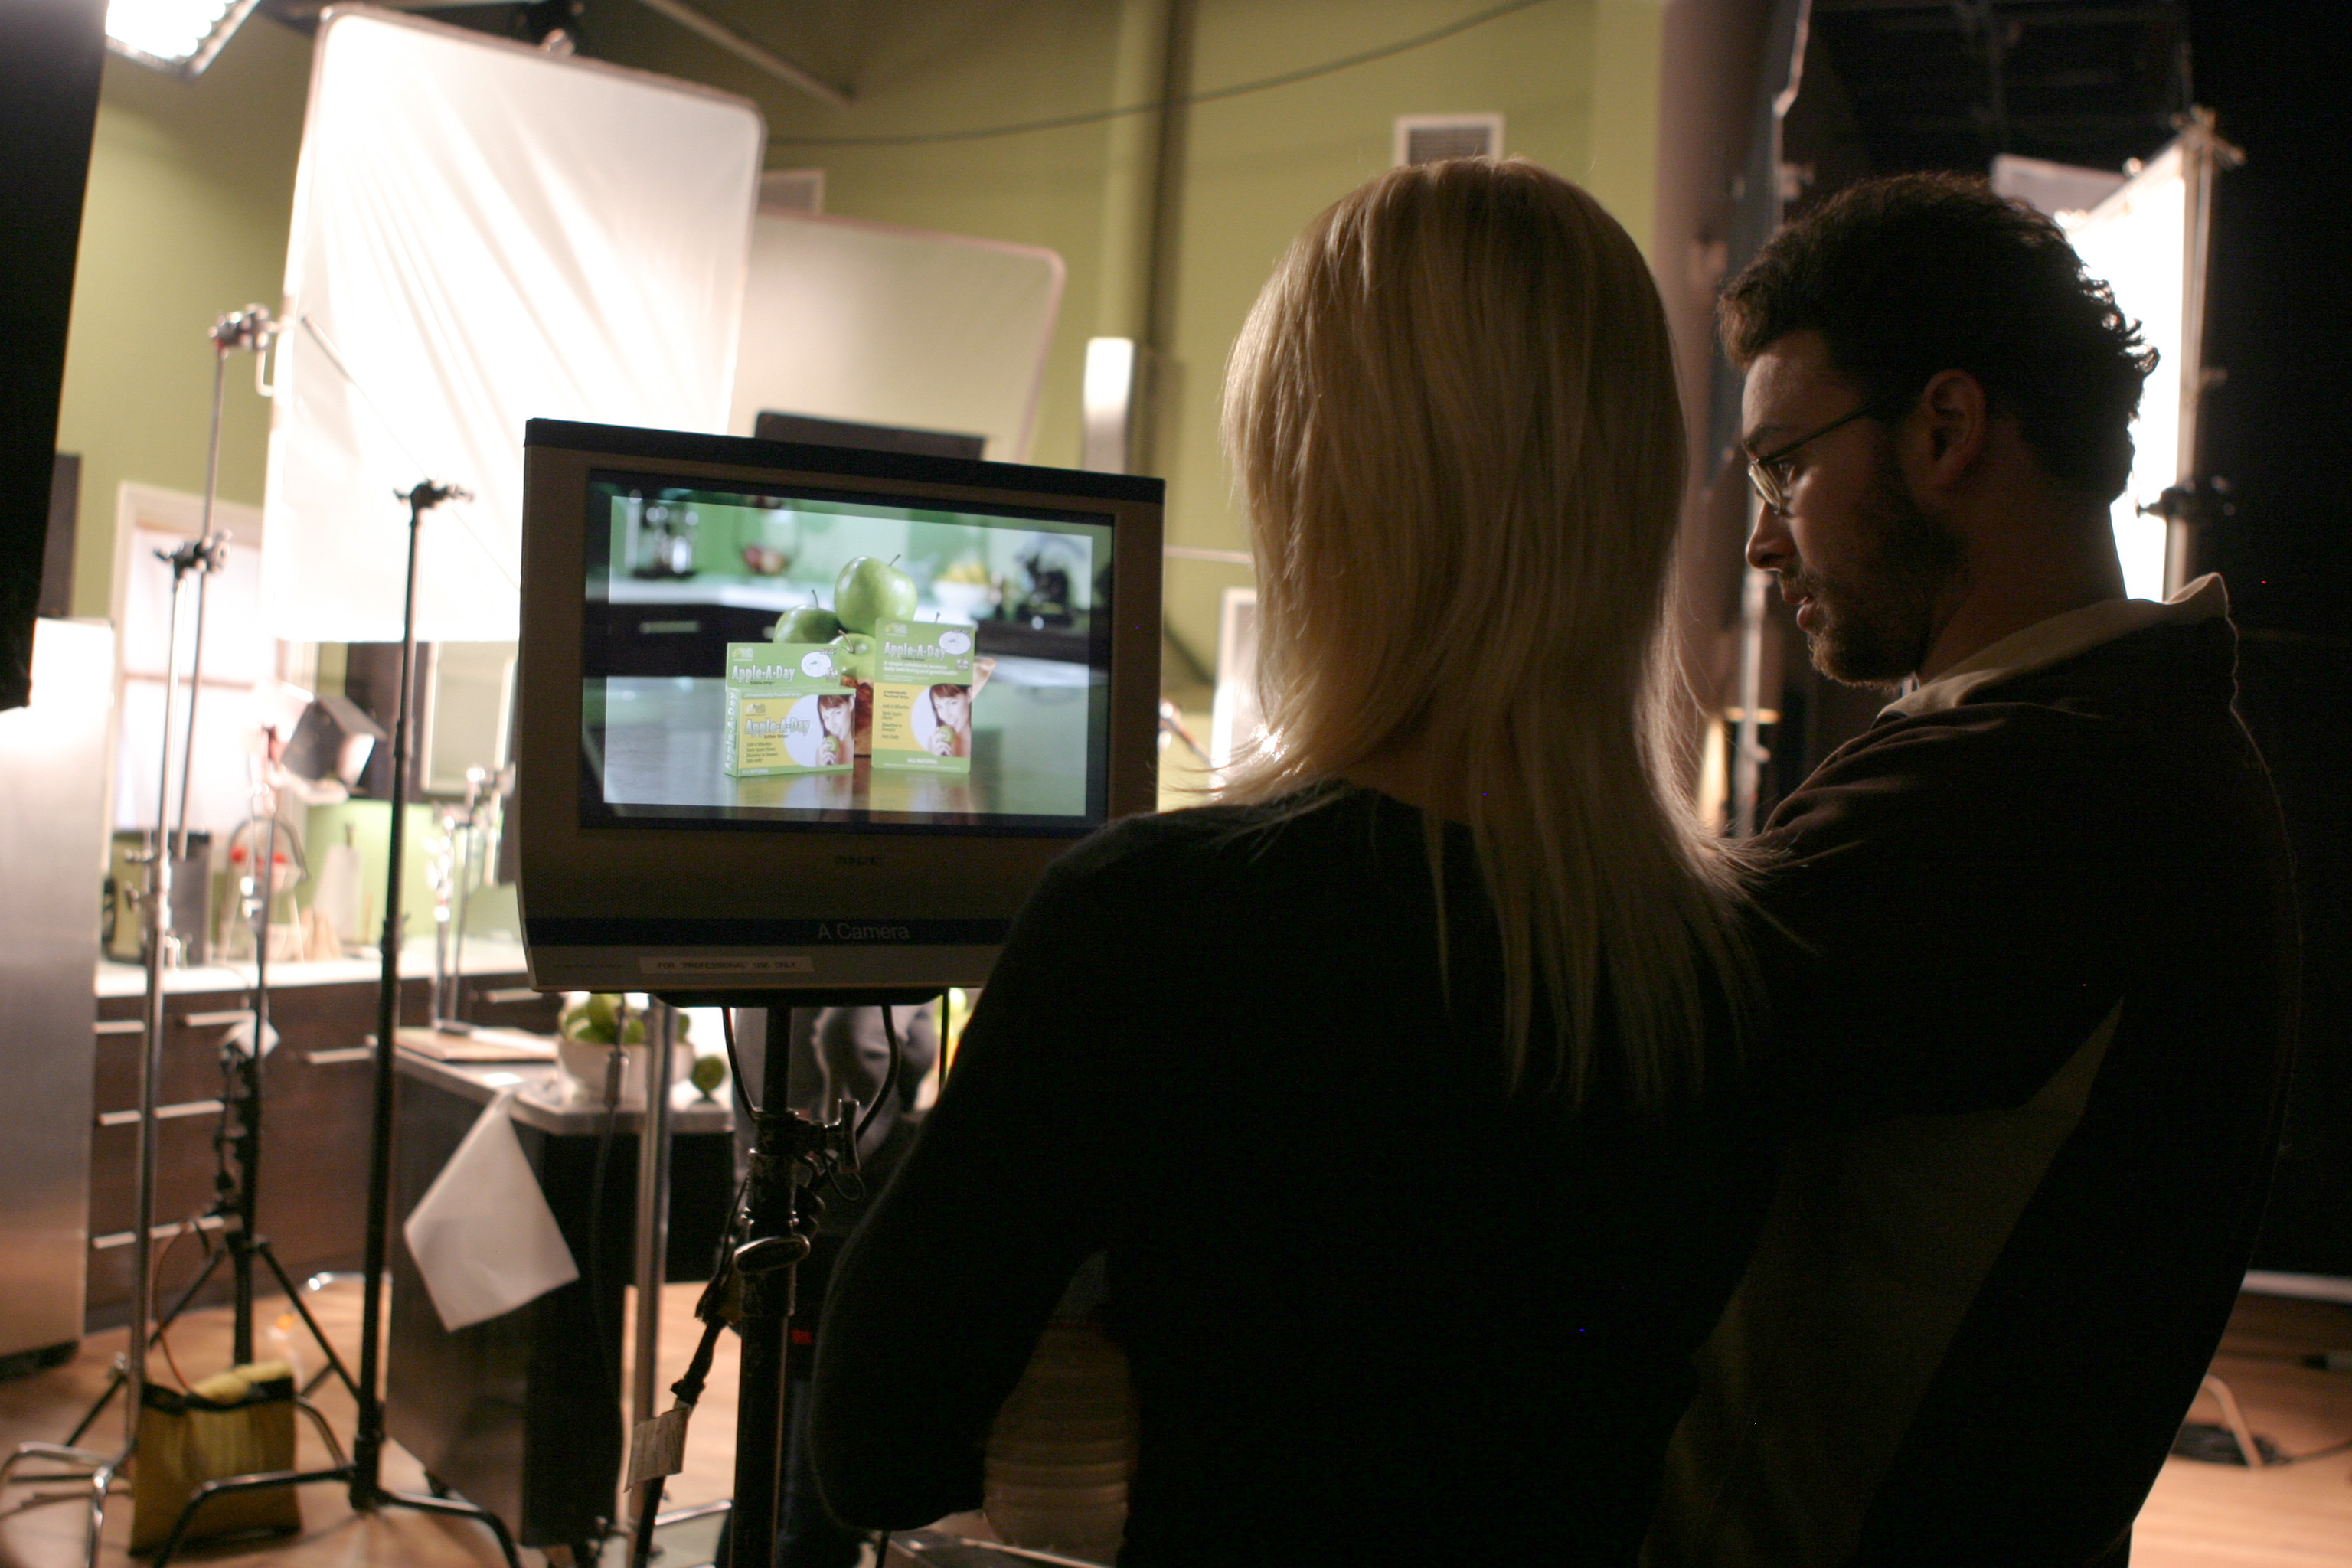 Director Jenine Mayring composes a shot with cinematographer Evin Grant, on the set of a national TV commercial shoot for Apple-A-Day Edible Strips, produced by Brooklyn Girl Productions.